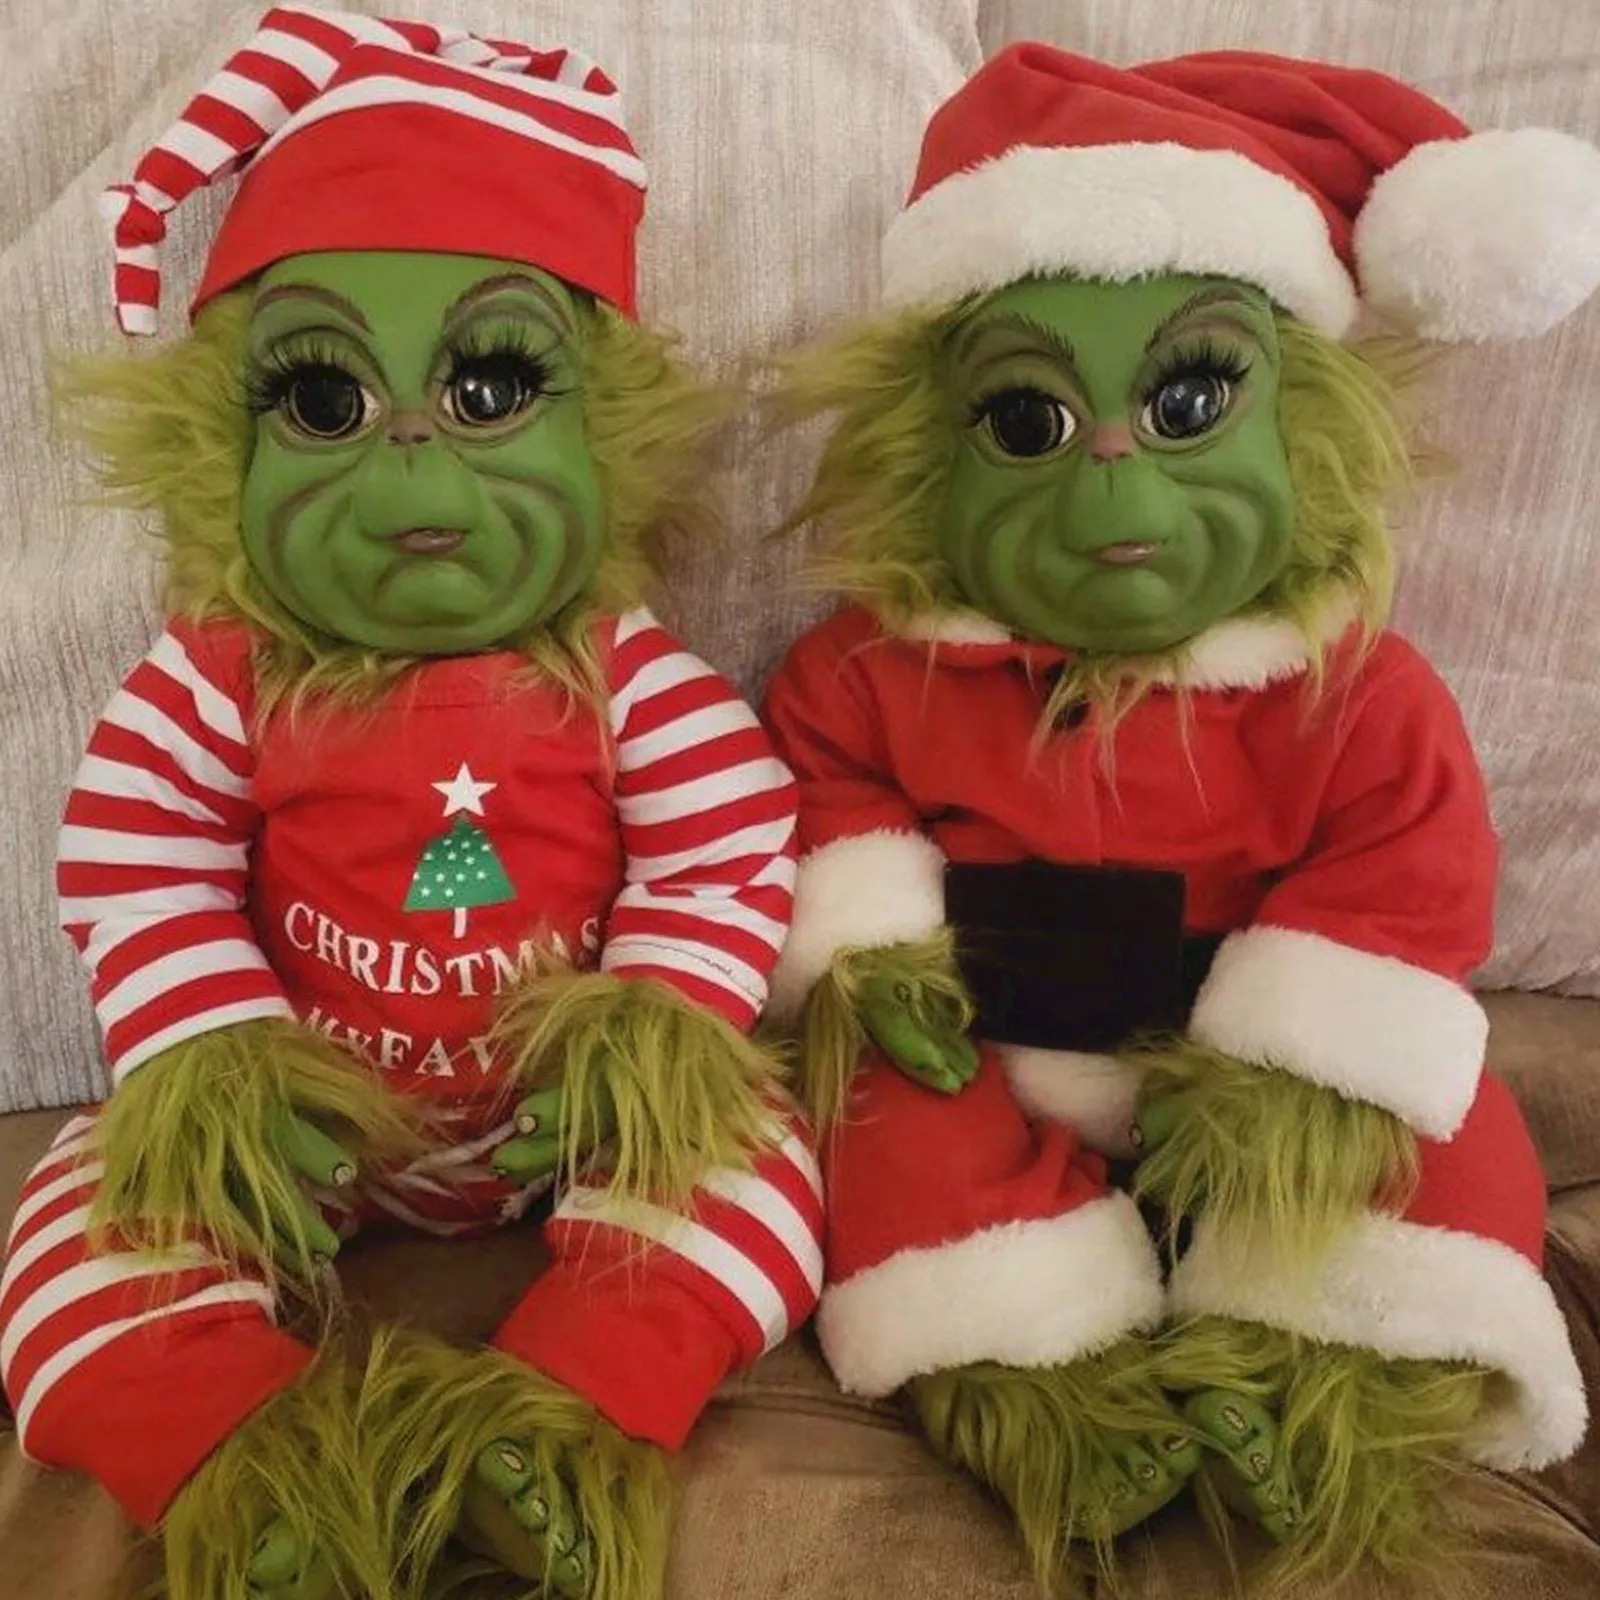 christmas grinch doll christmas grinch baby stuffed plush toy 2ifelike grinch doll christmas cute doll toy xmas gifts